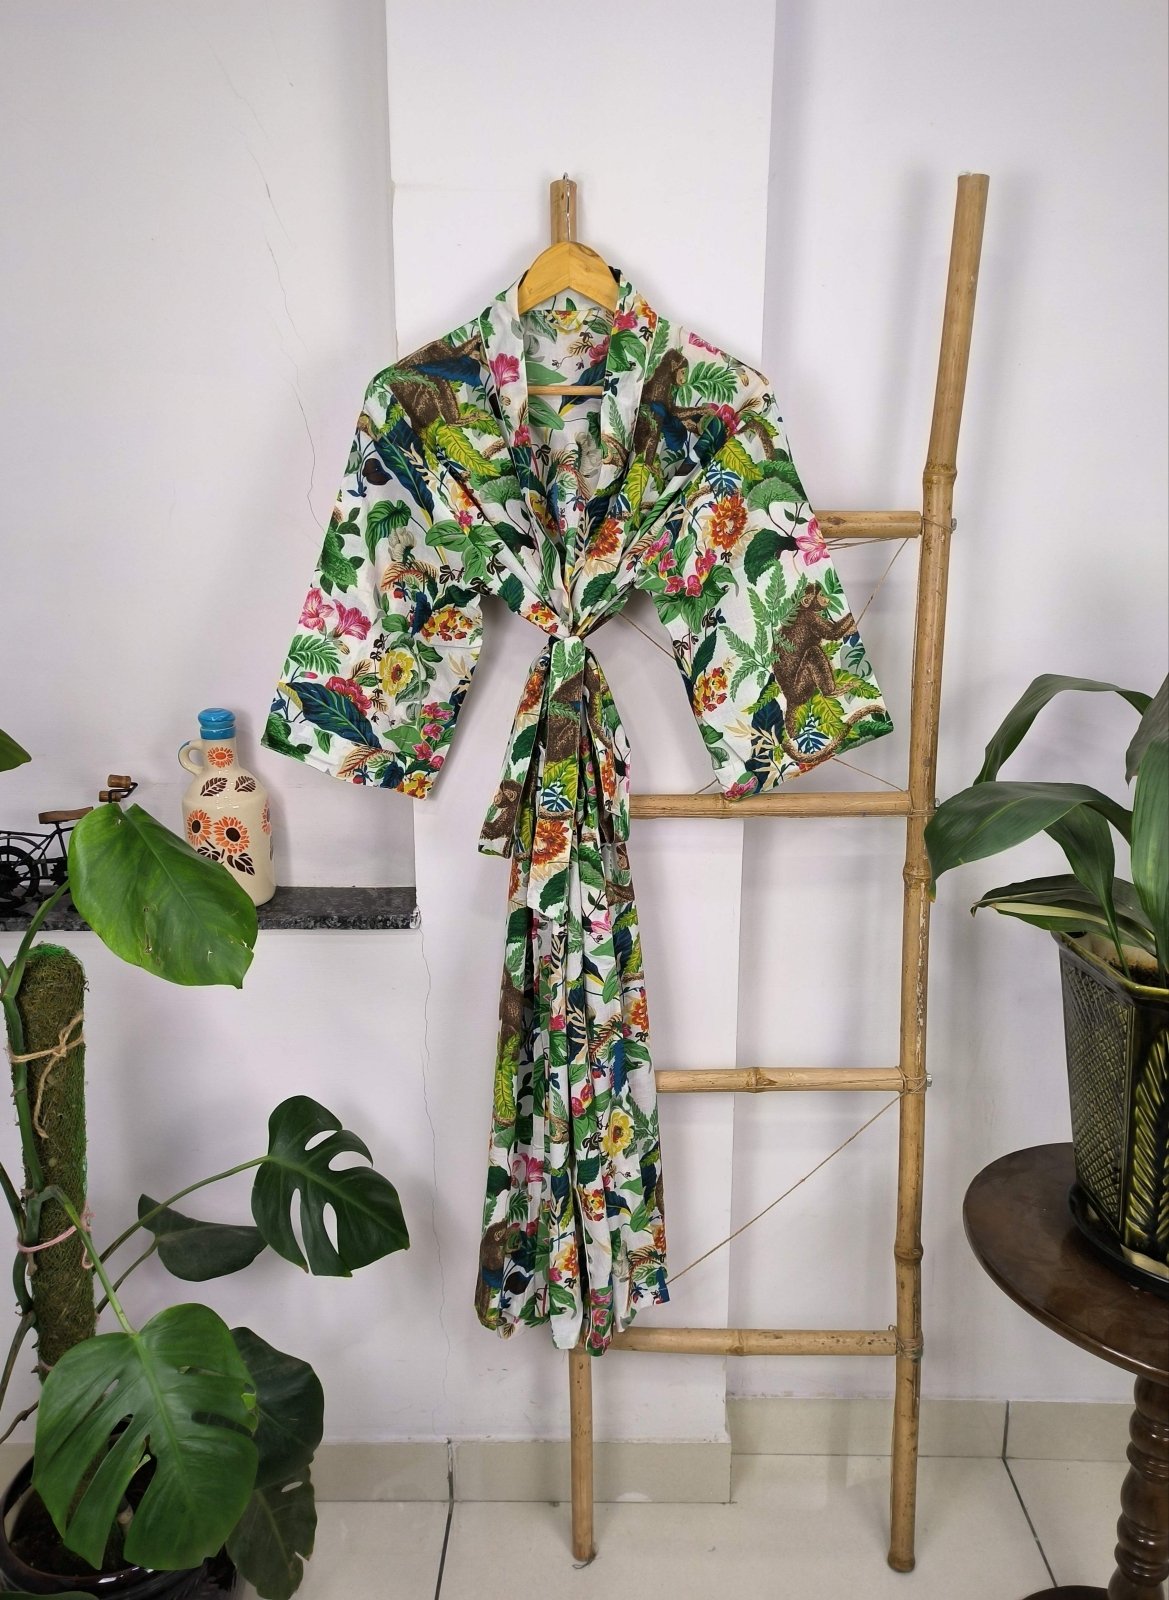 Boho House Robe Indian Handprinted Cotton Kimono Jungle Monkey Print | Perfect for Summer Luxury Beach Holiday Yacht Cover Up Stunning Dress - The Eastern Loom